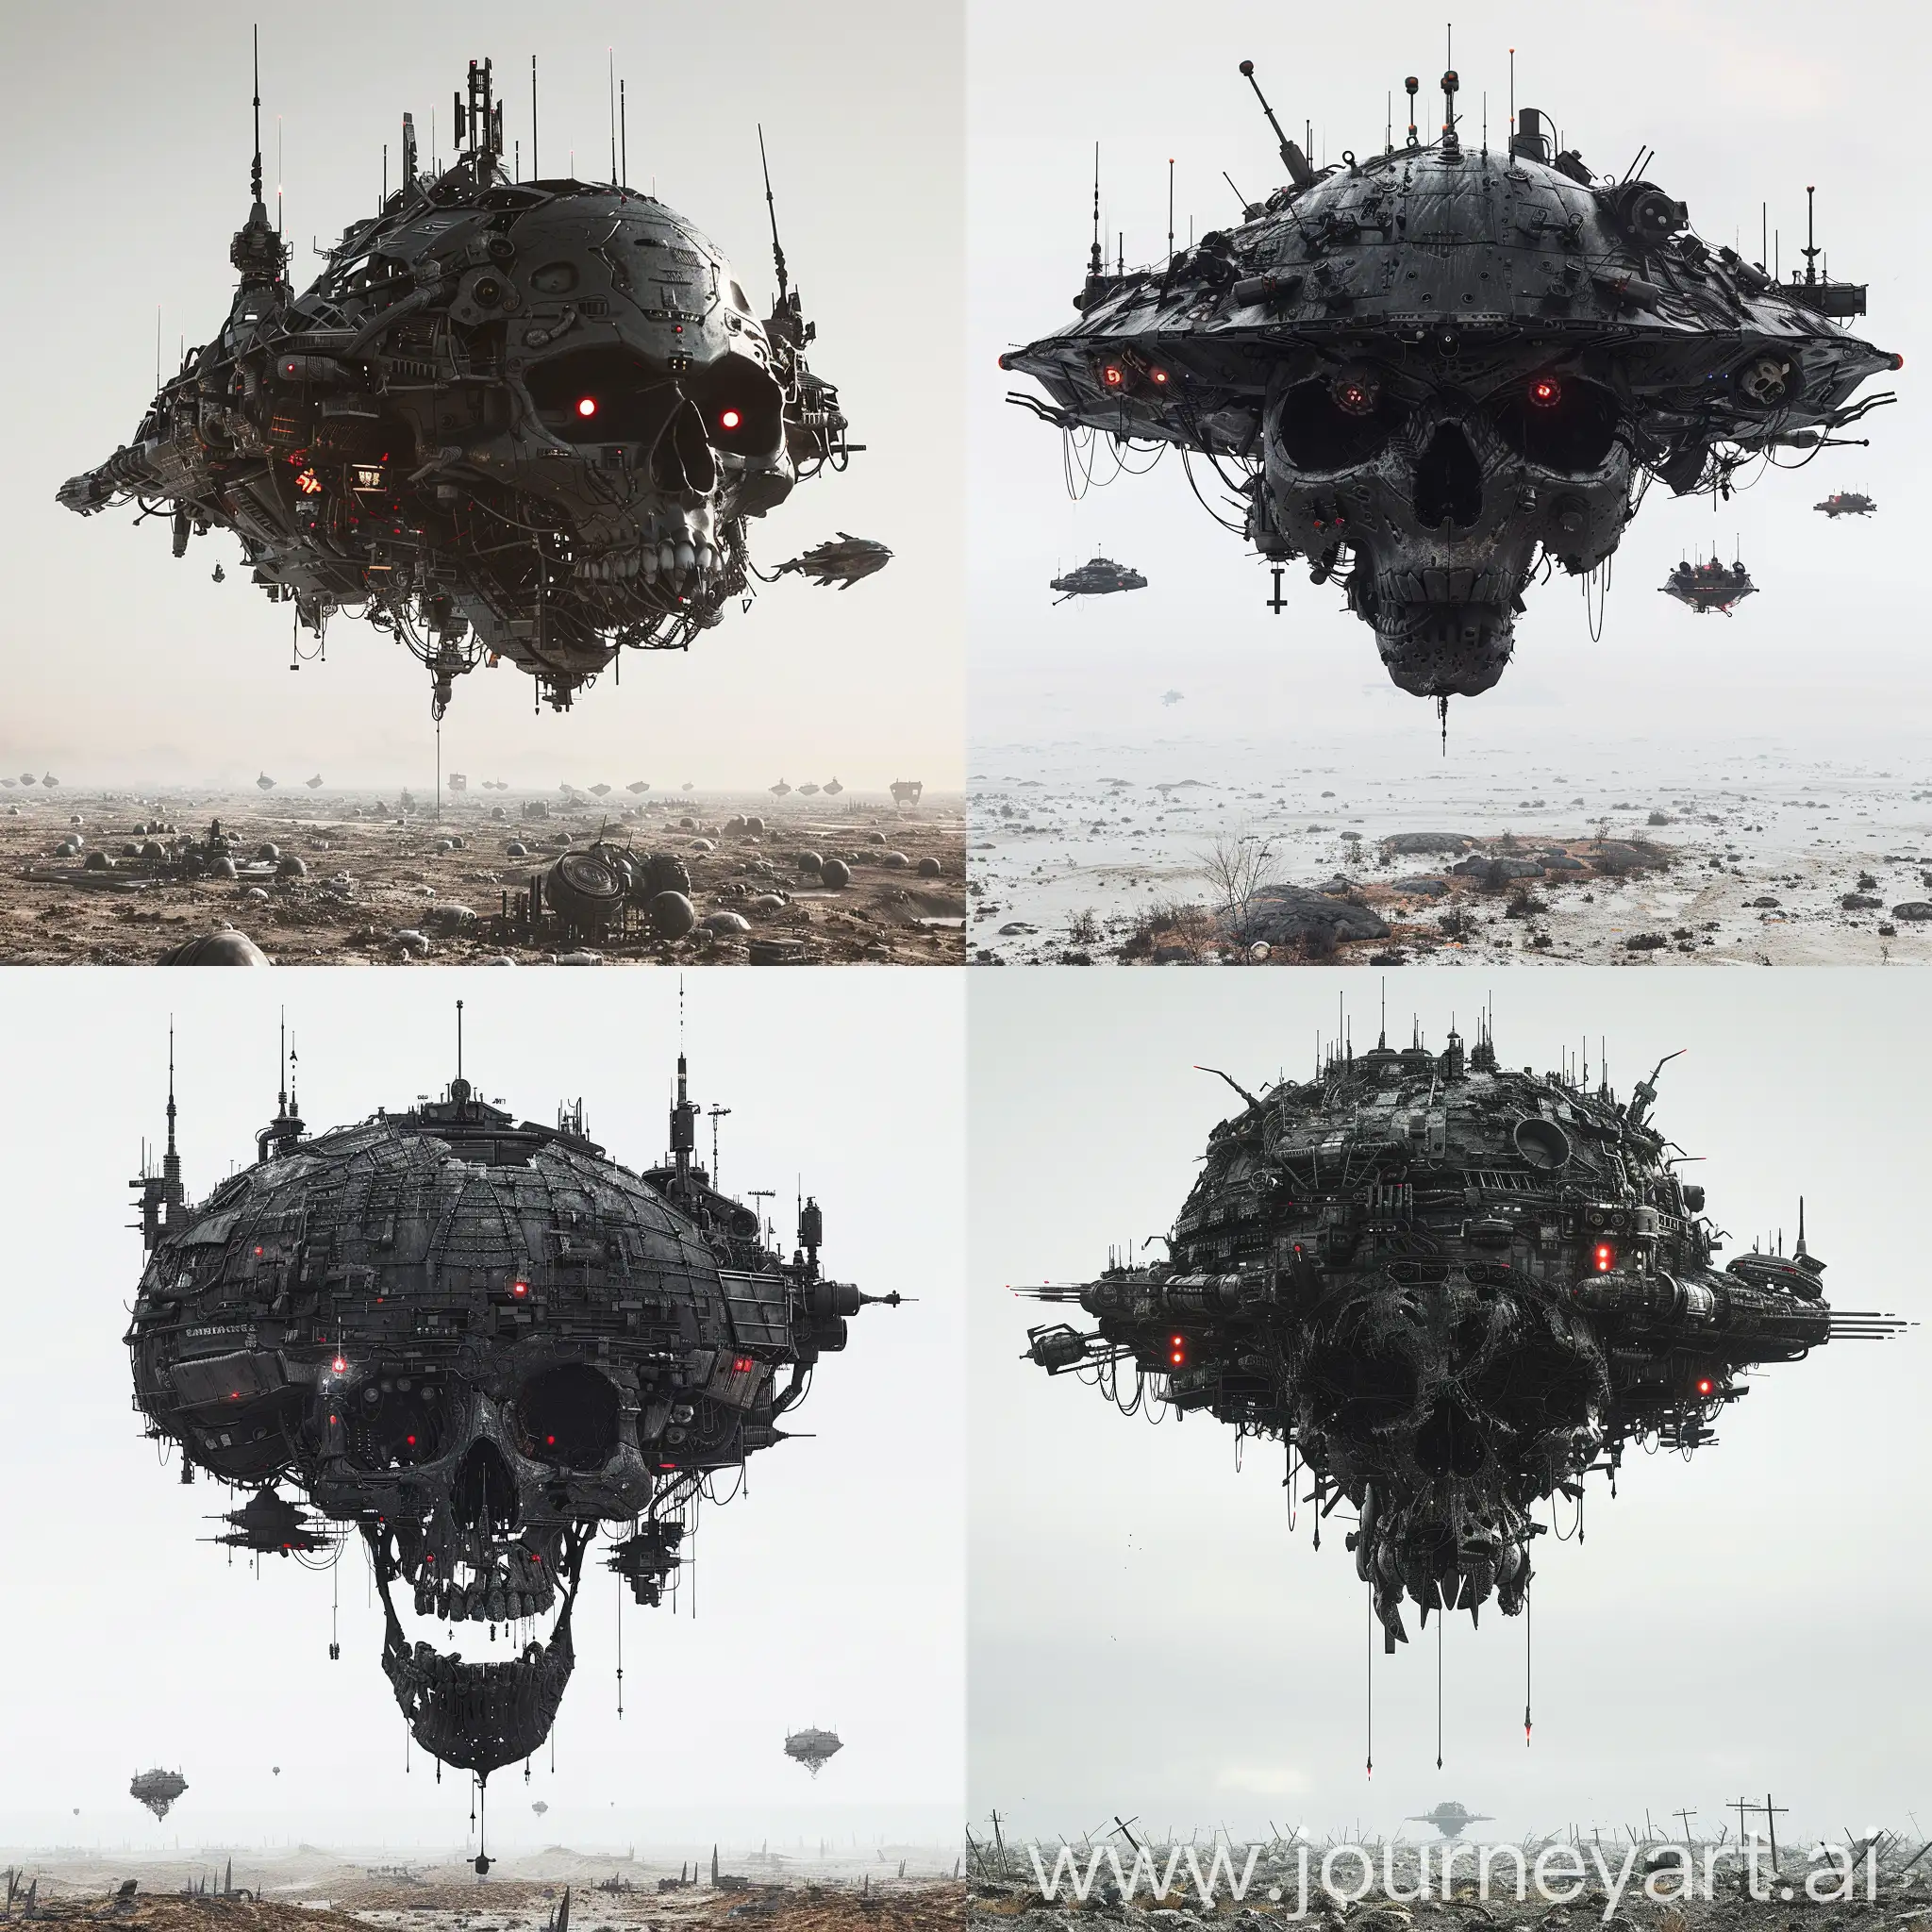 a massive ominous black techno flying fortress shaped like a skull hovering above the postapocalyptic landscape, massive skull shaped black metal spaceship fortress, made from other ships and scraps, black metal with small red lights and antenna, photographic, clean white background --s 50 --v 6.0